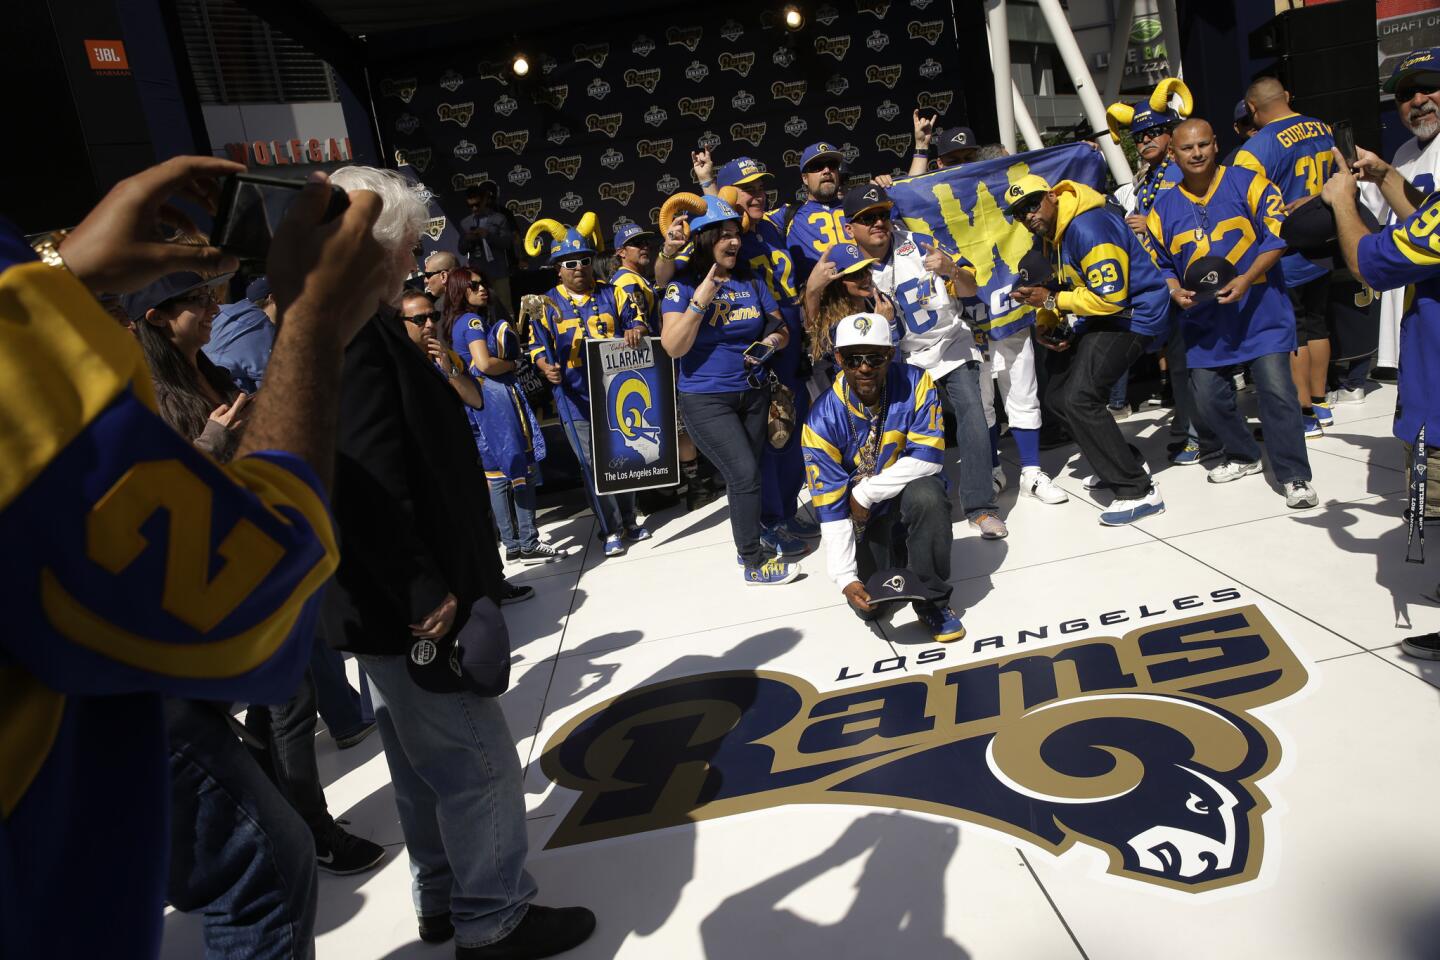 Los Angeles Rams fans pause for photos with the team's logo at a 2016 NFL football draft party Thursday, April 28, 2016 in Los Angeles. (AP Photo/Jae C. Hong)